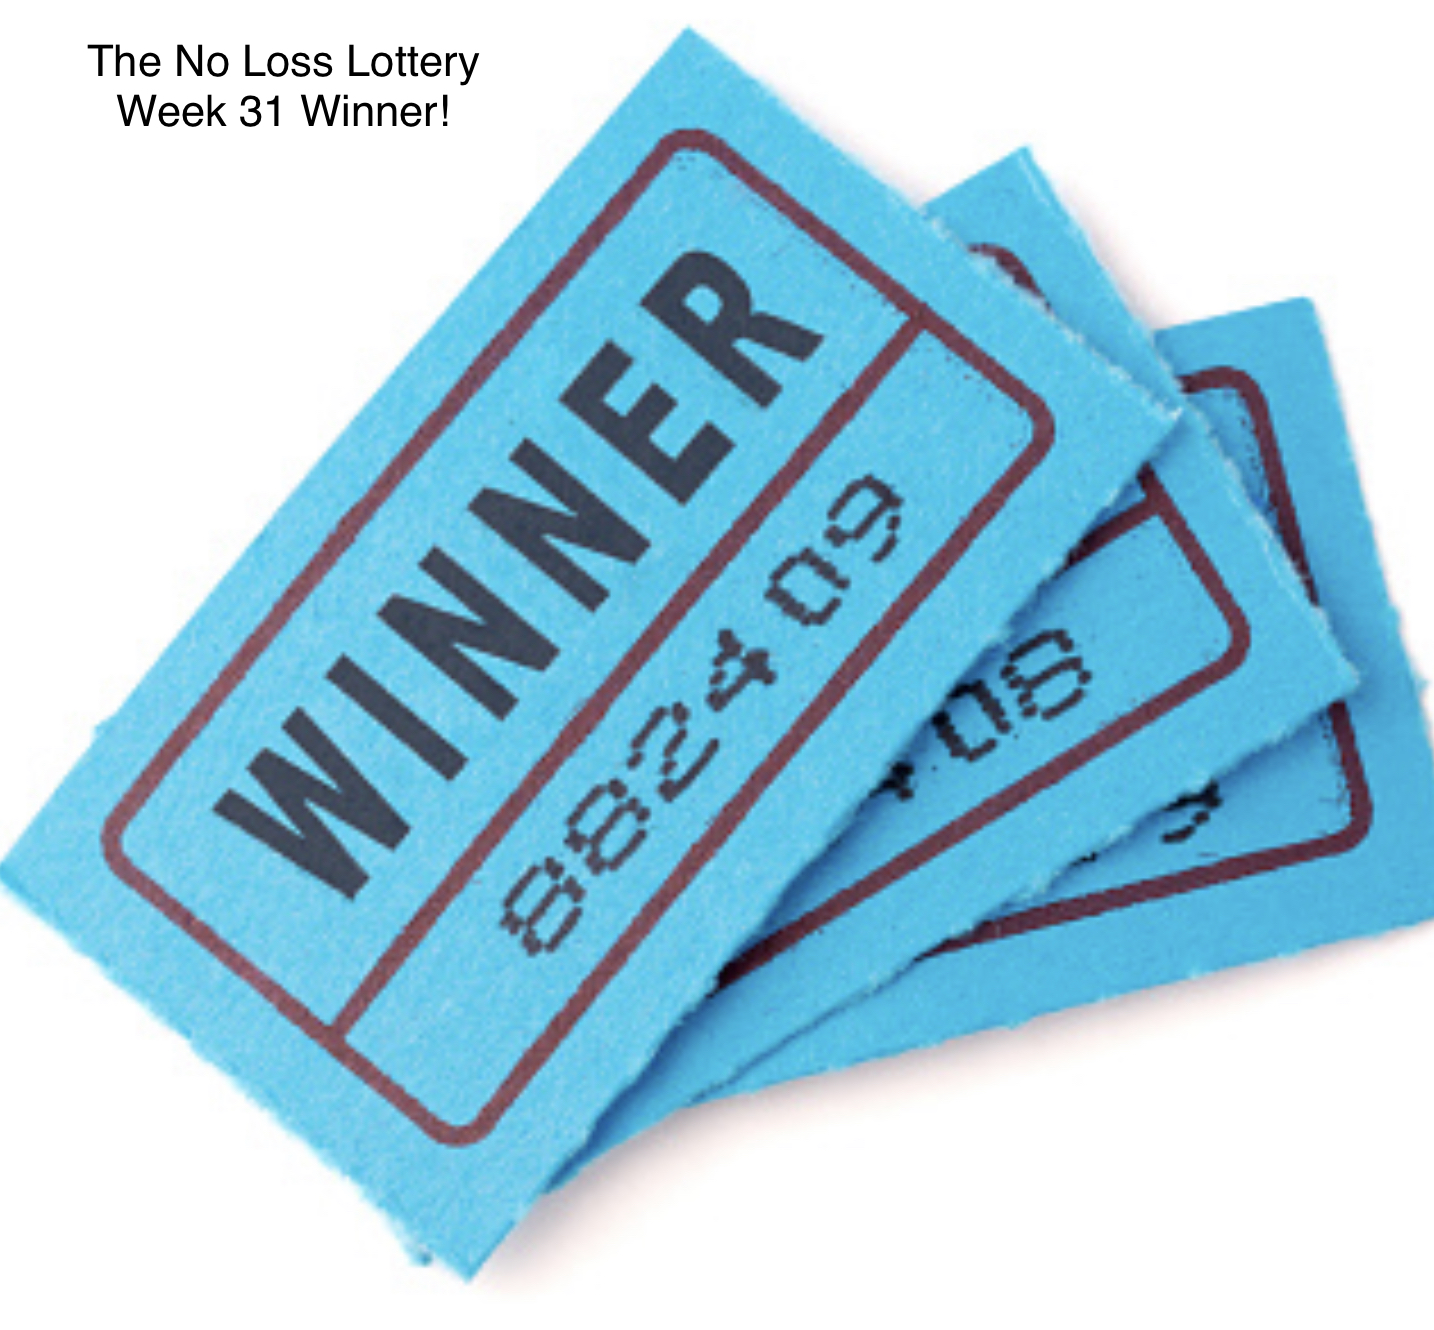 @nolosslottery/winners-announcement-week-thirty-one-of-the-no-loss-lottery